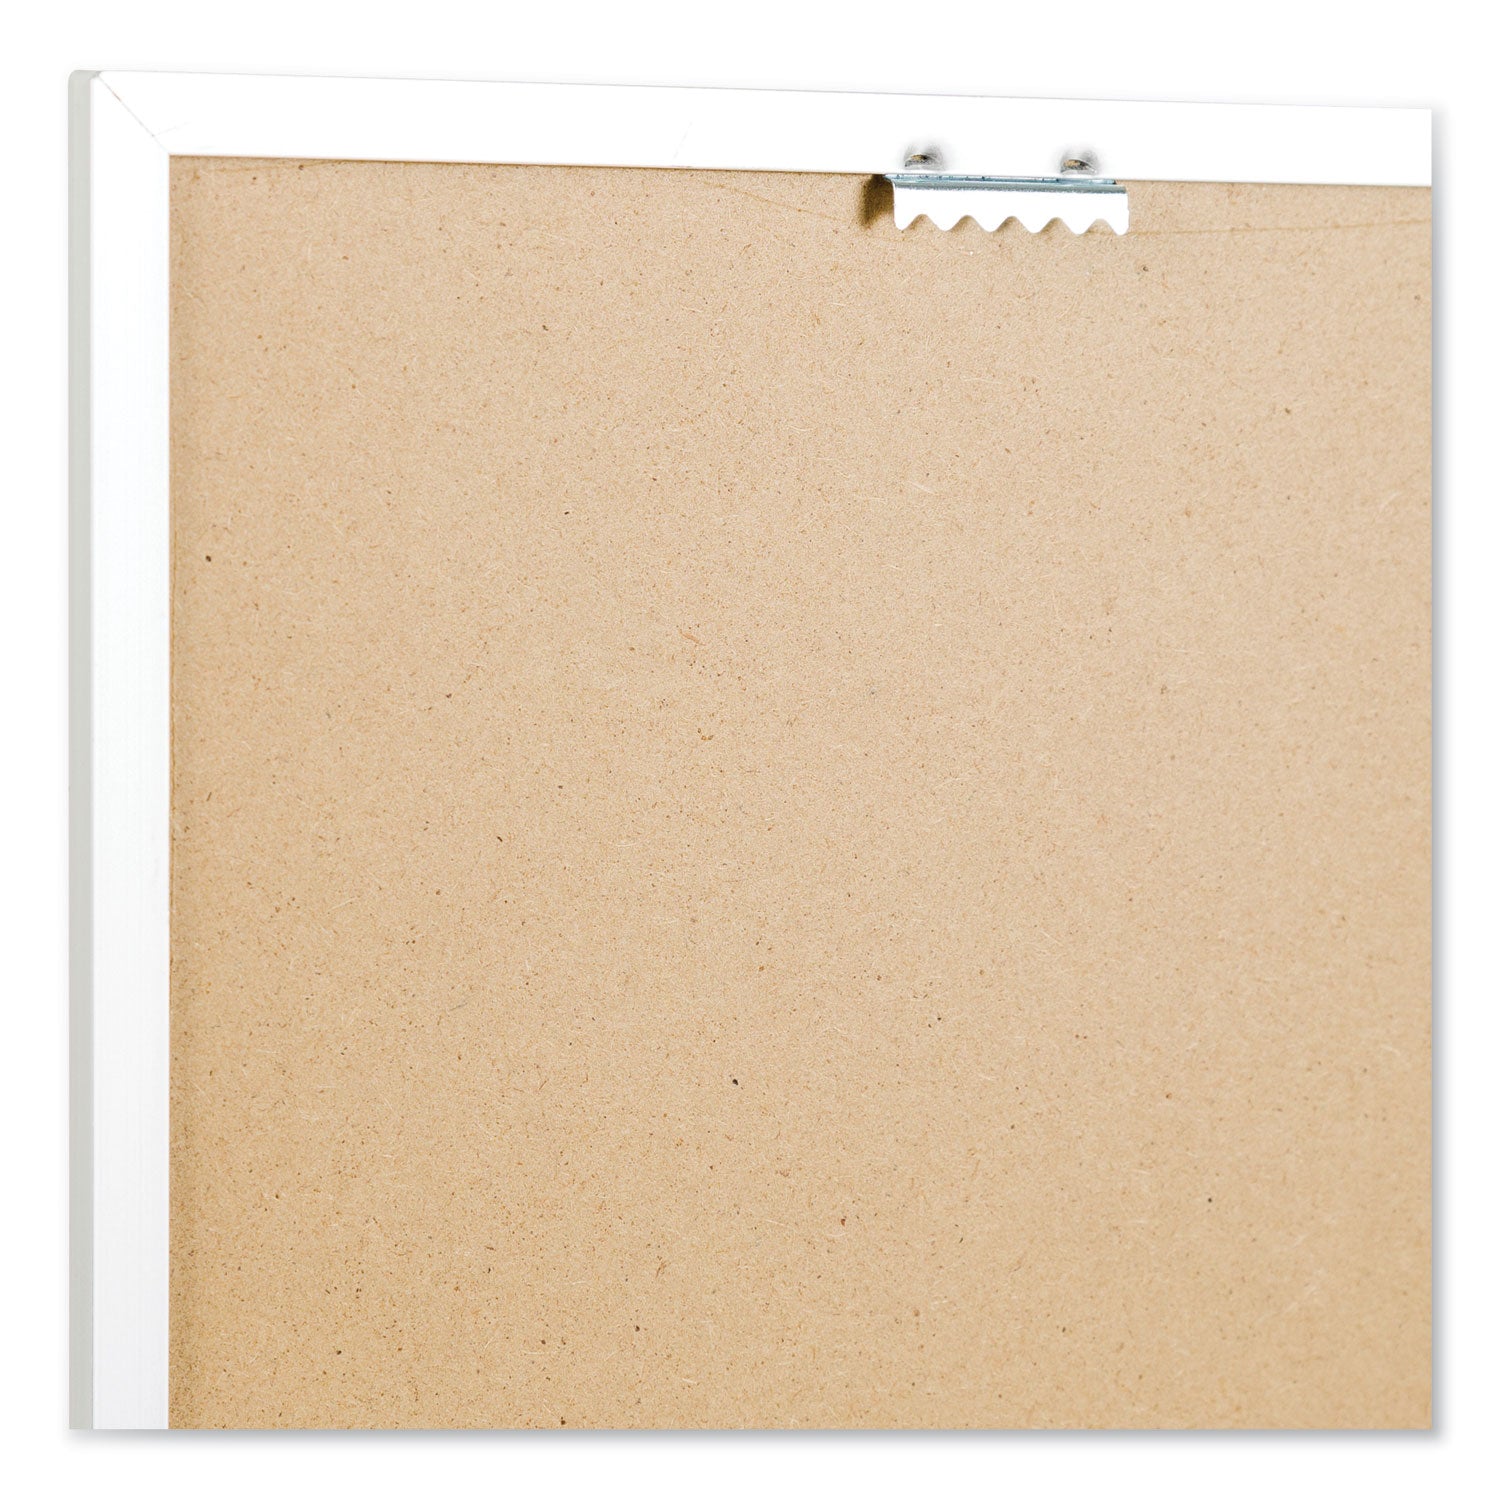 magnetic-dry-erase-board-undated-one-month-20-x-16-white-surface-silver-aluminum-frame_ubr361u0001 - 5